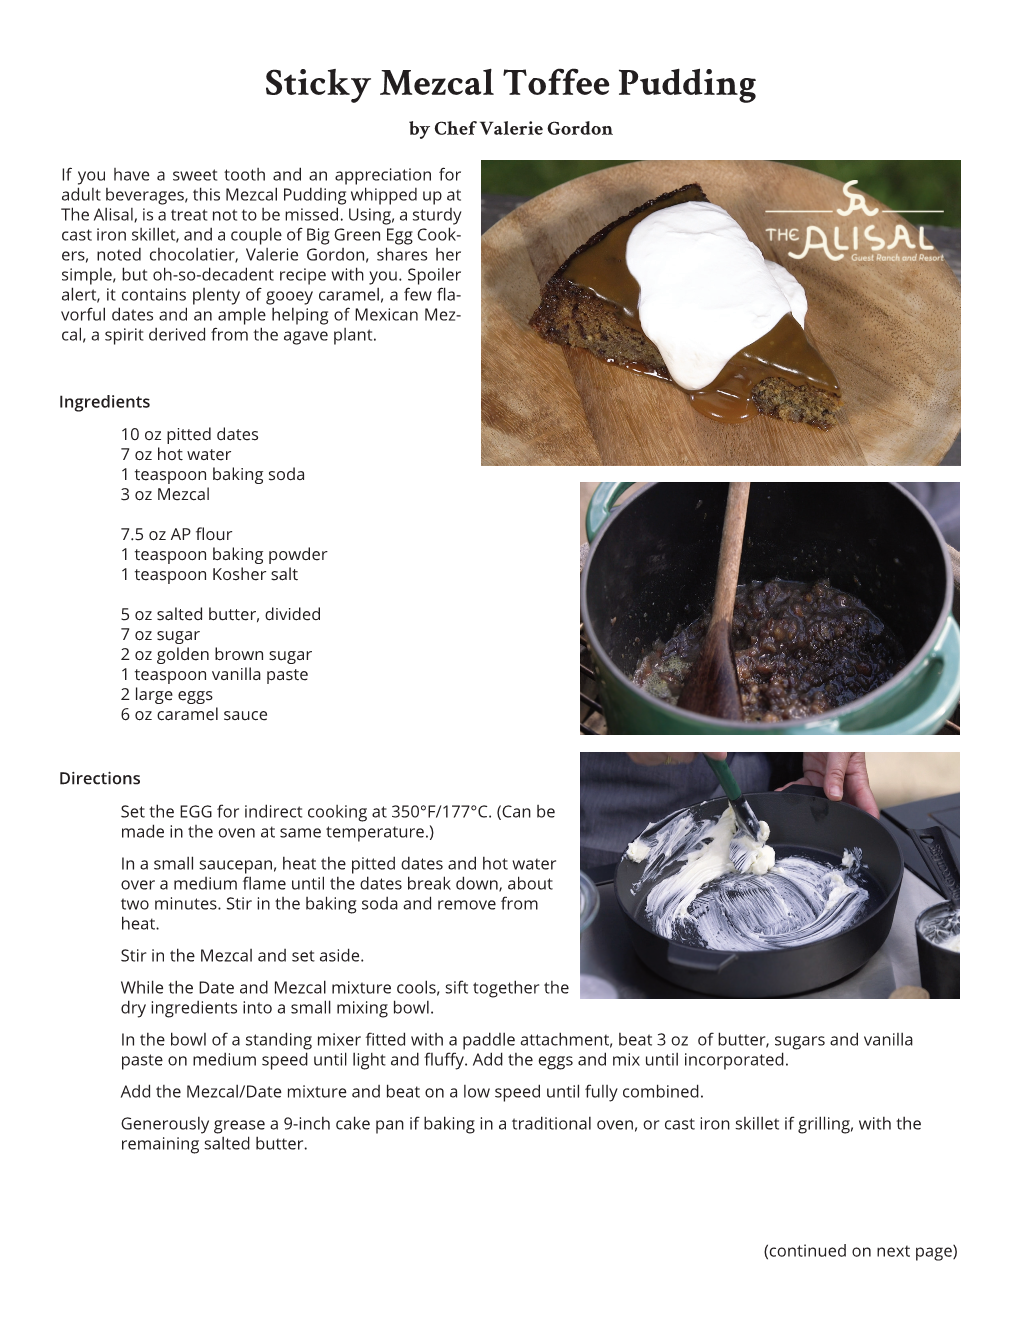 Sticky Mezcal Toffee Pudding by Chef Valerie Gordon